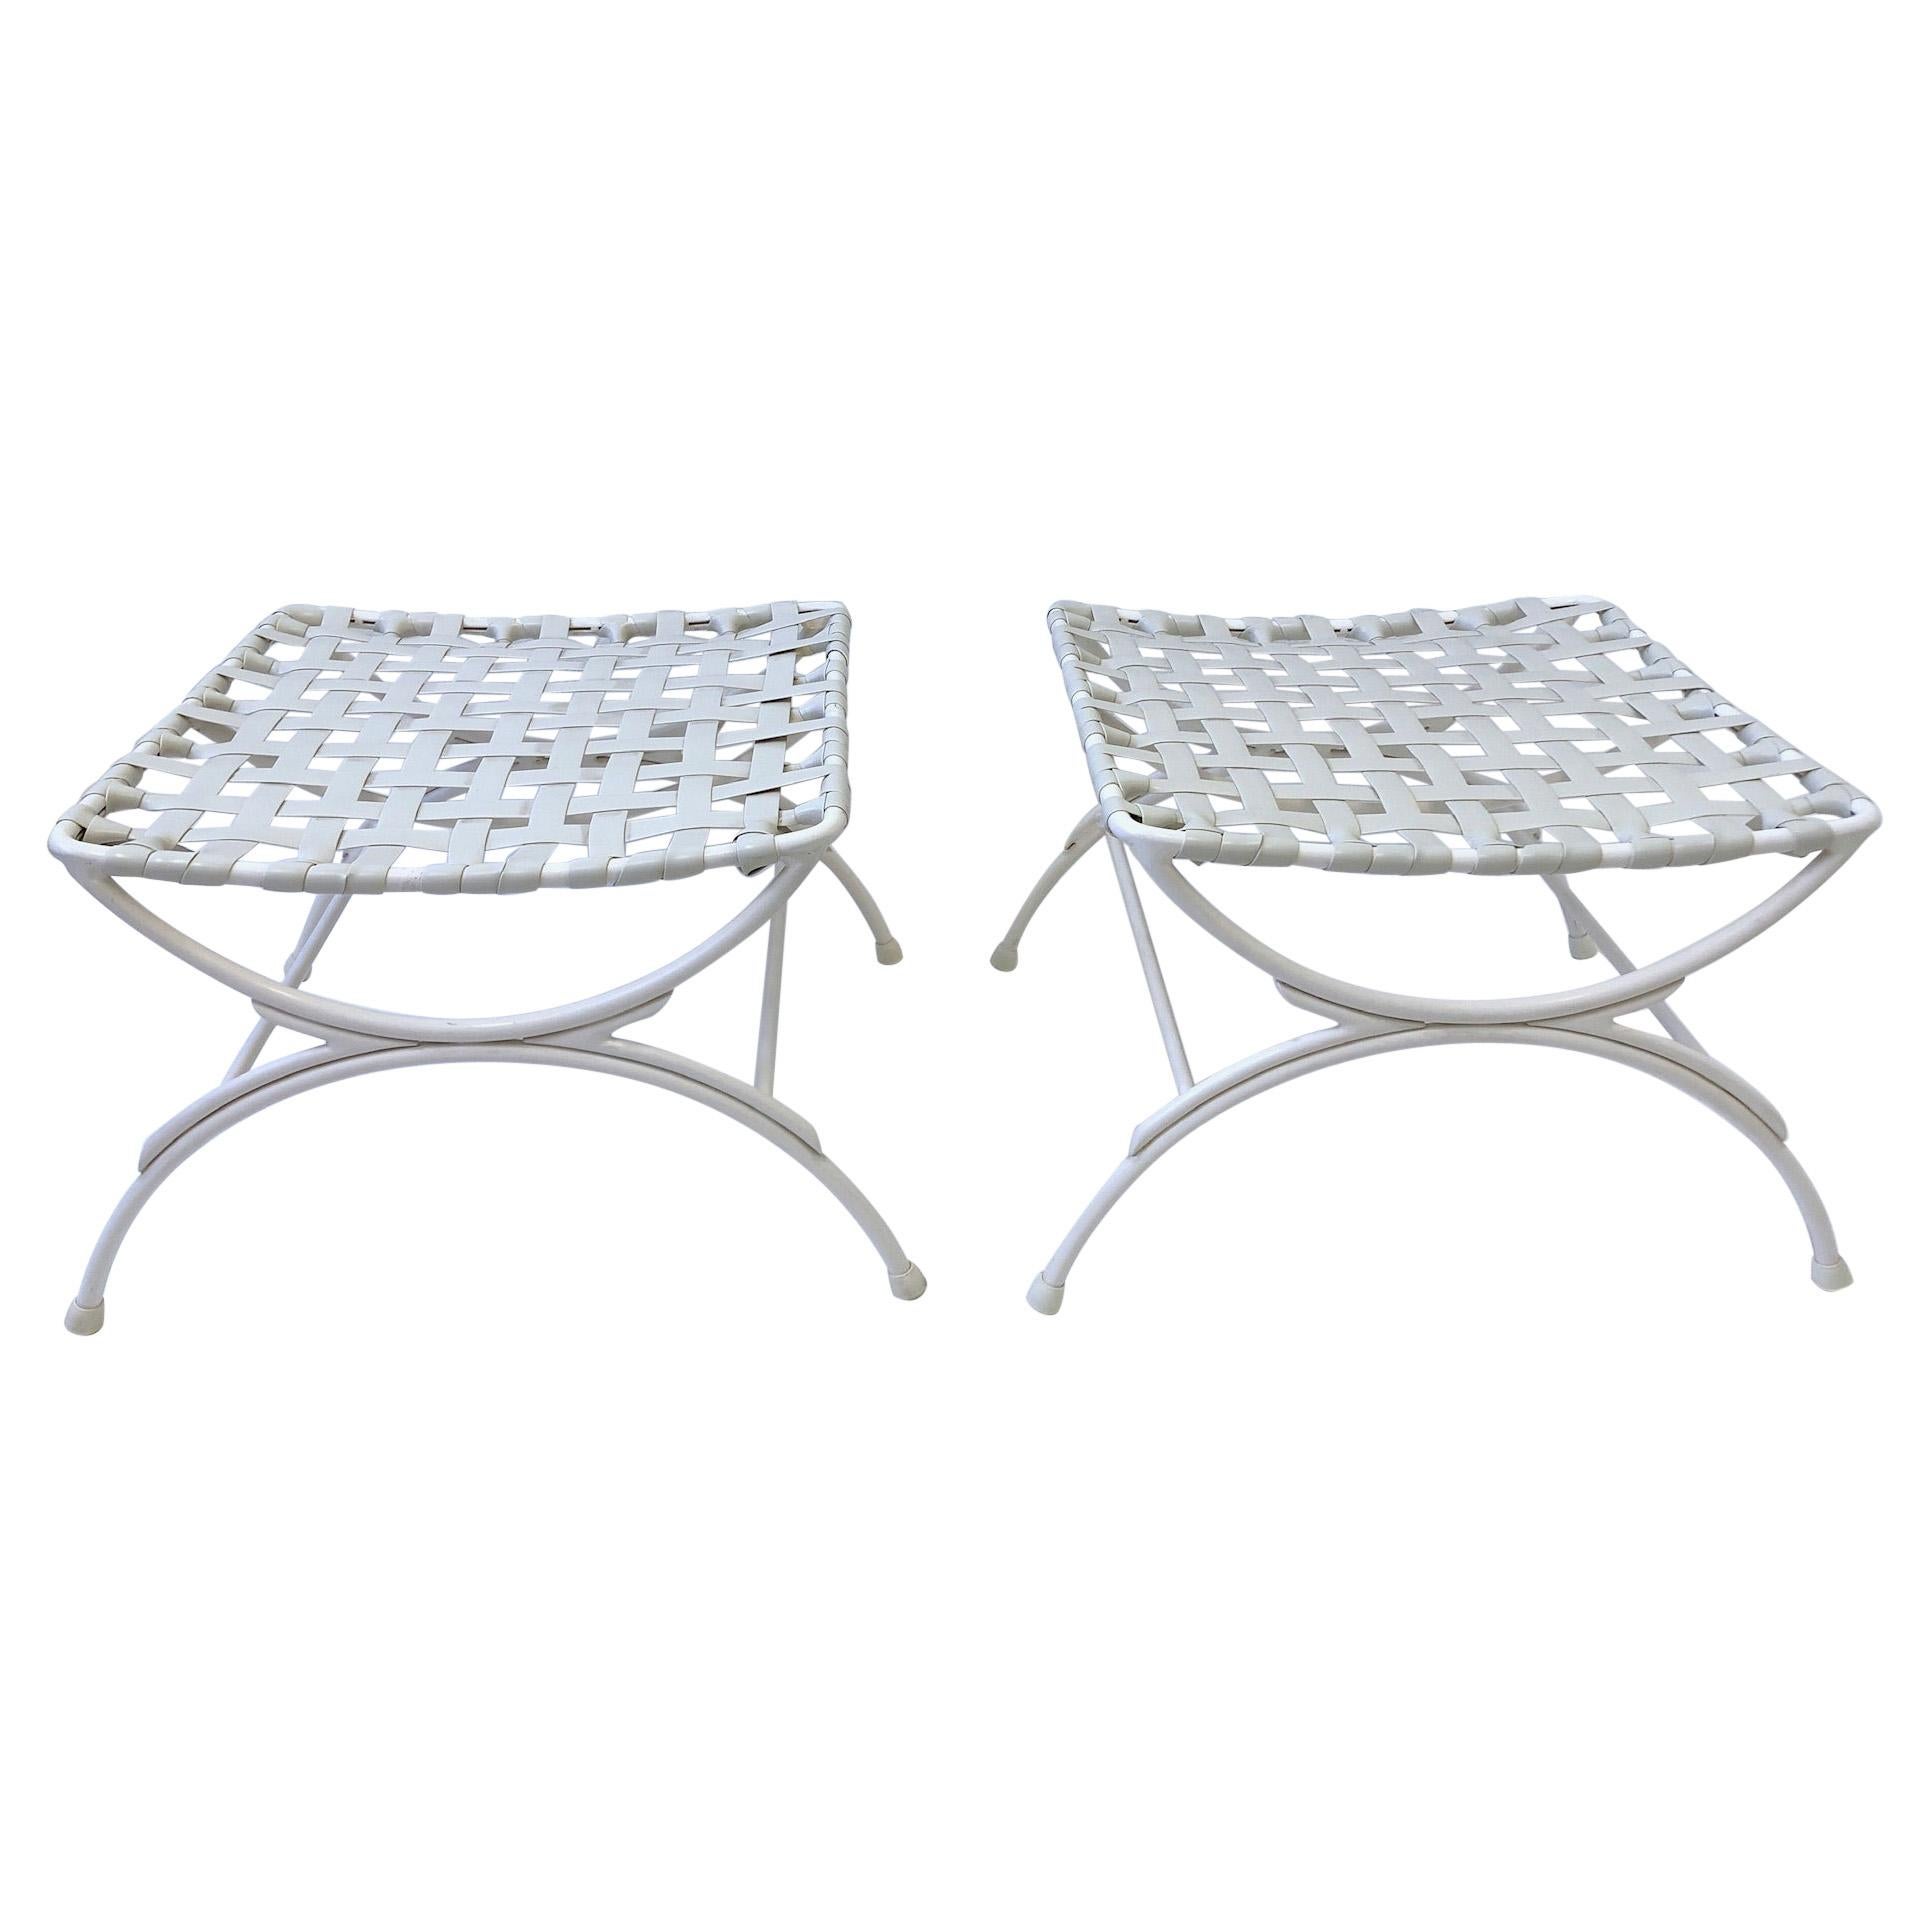 off White Pair of Outdoor Ottoman by Keller Scroll of Miami For Sale